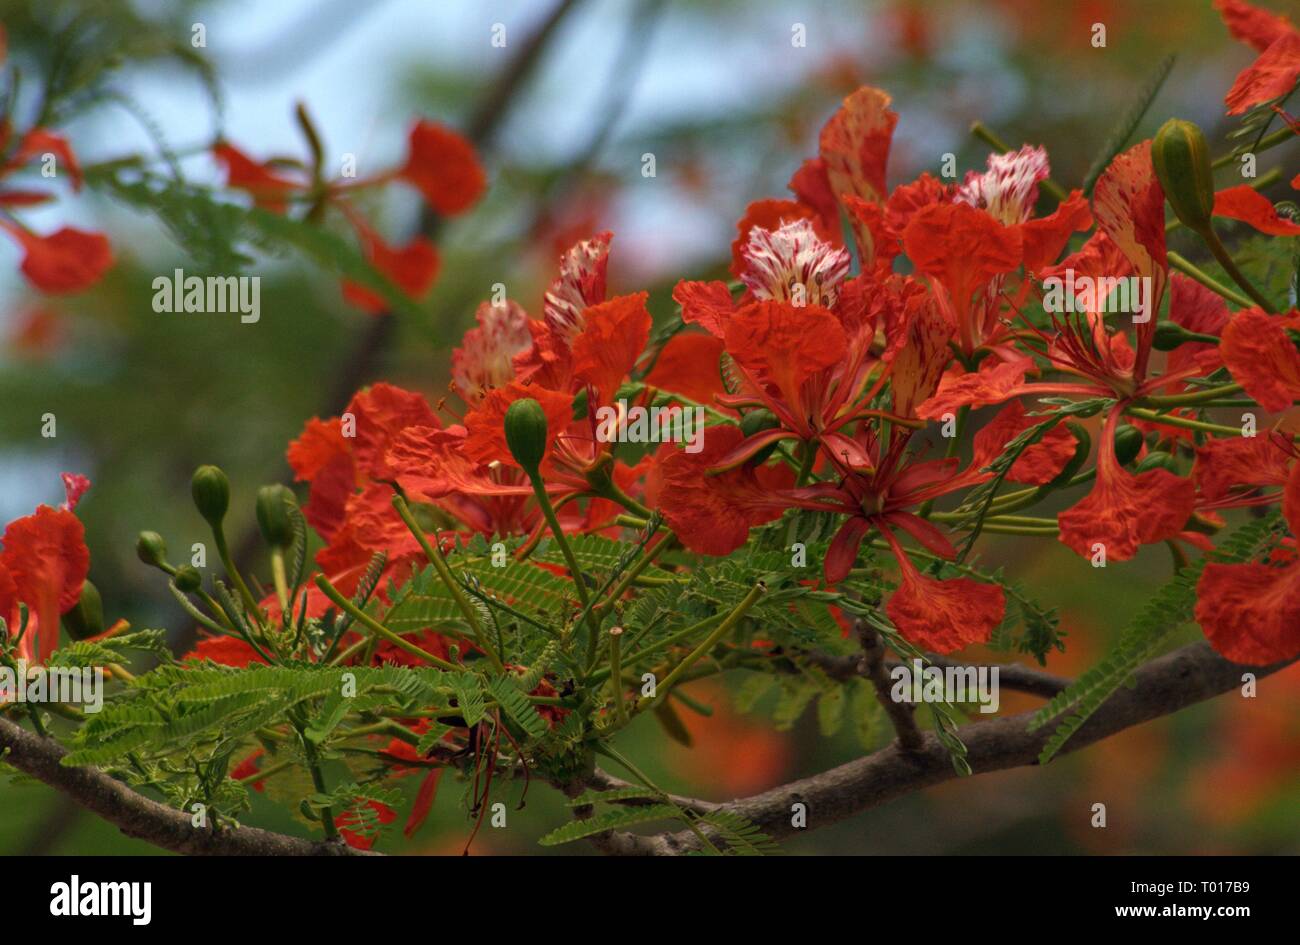 Flame tree flowers in bloom covering a branch of the tree Stock Photo